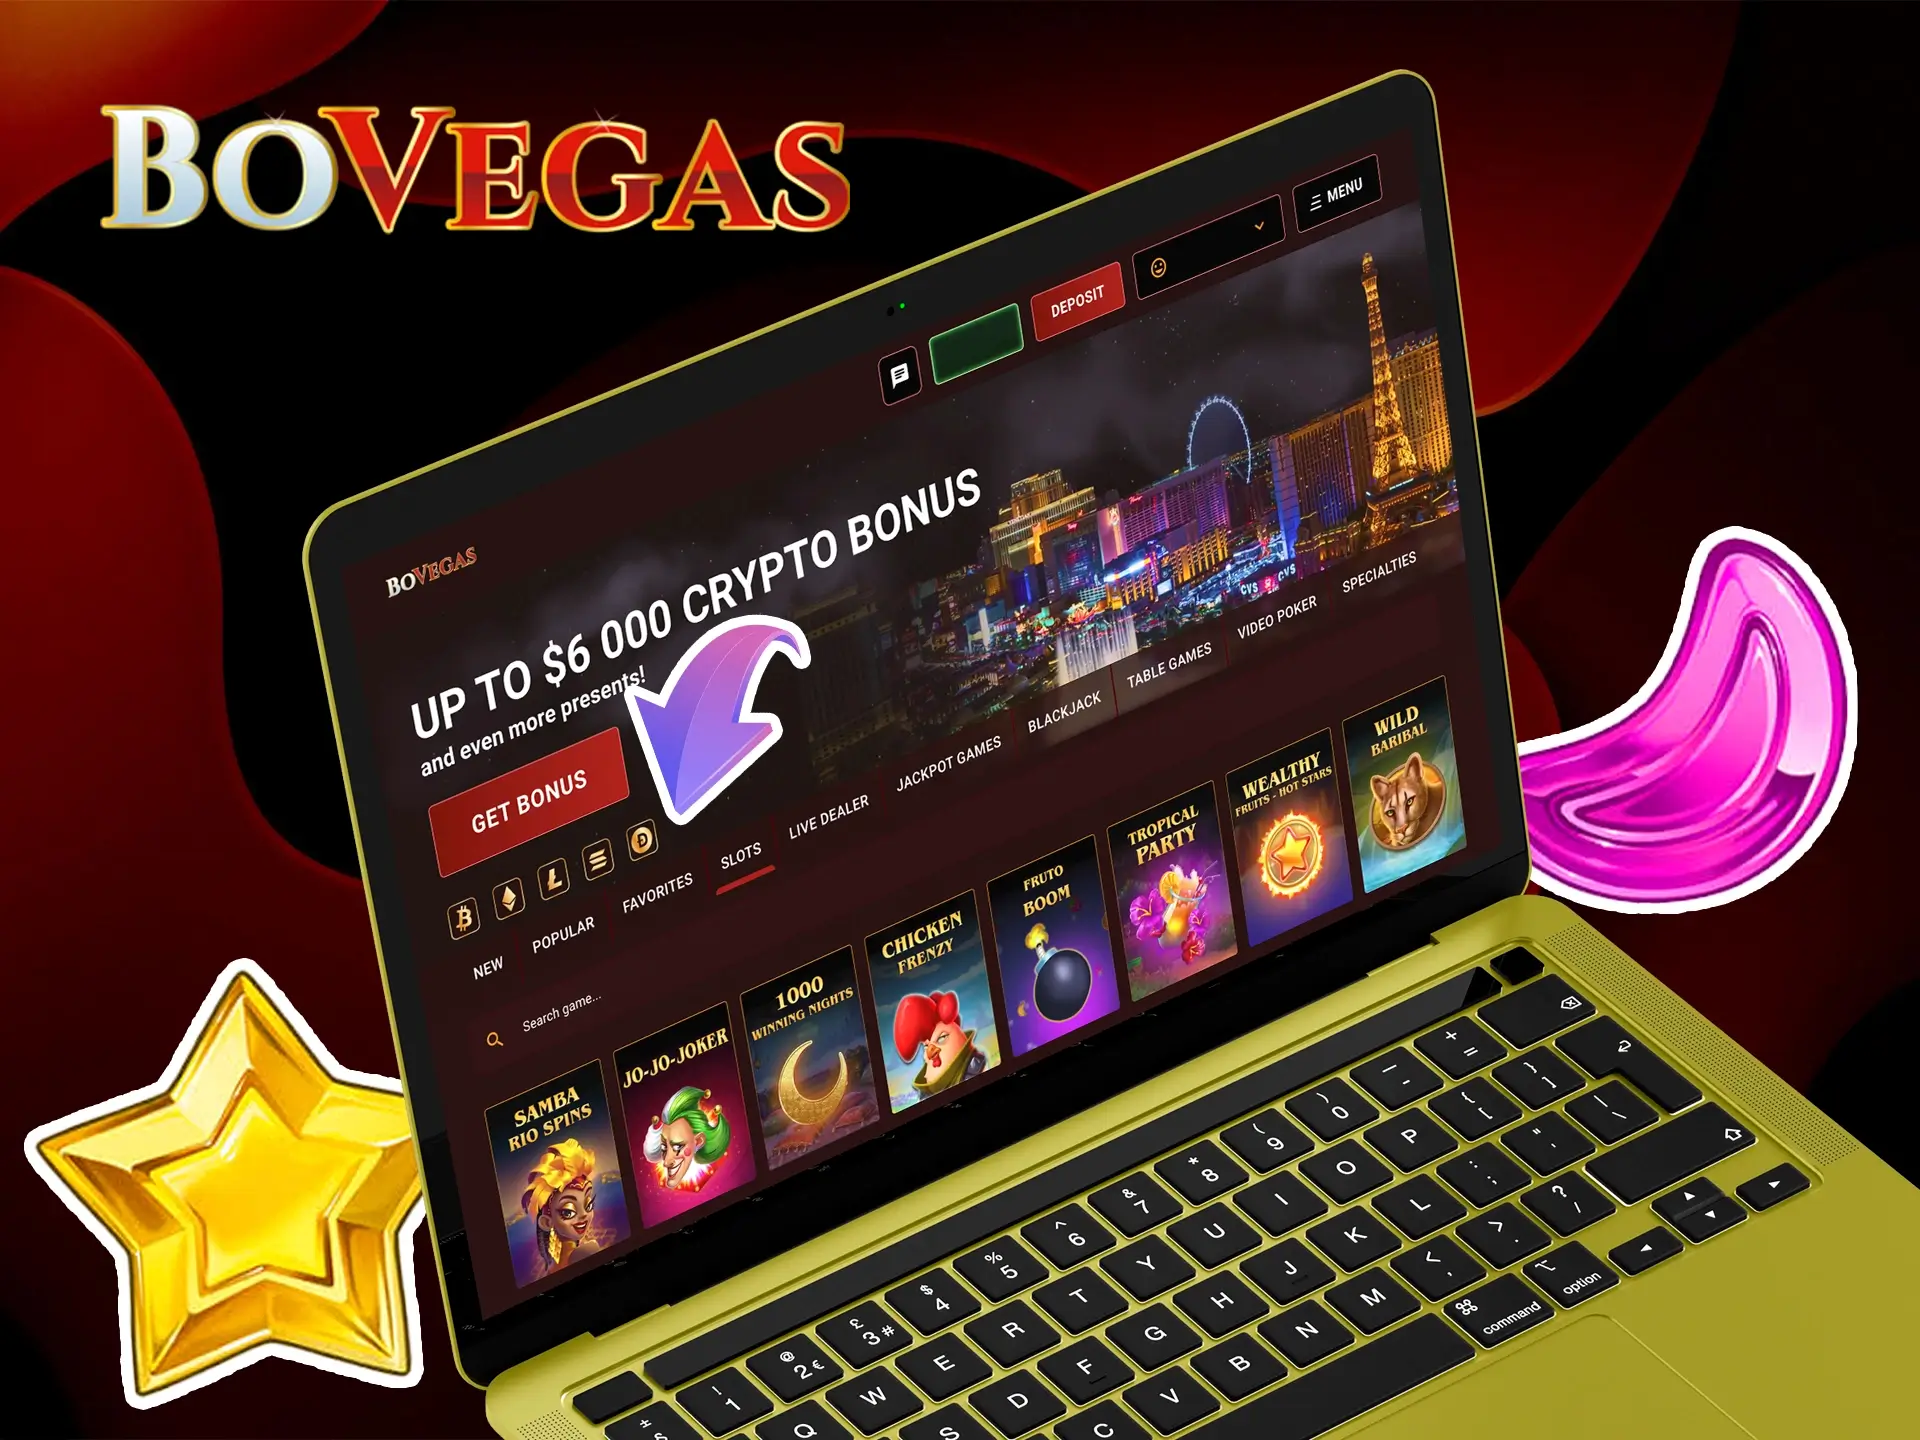 Start your immersion in the best BoVegas slots by completing a simple and straightforward registration.